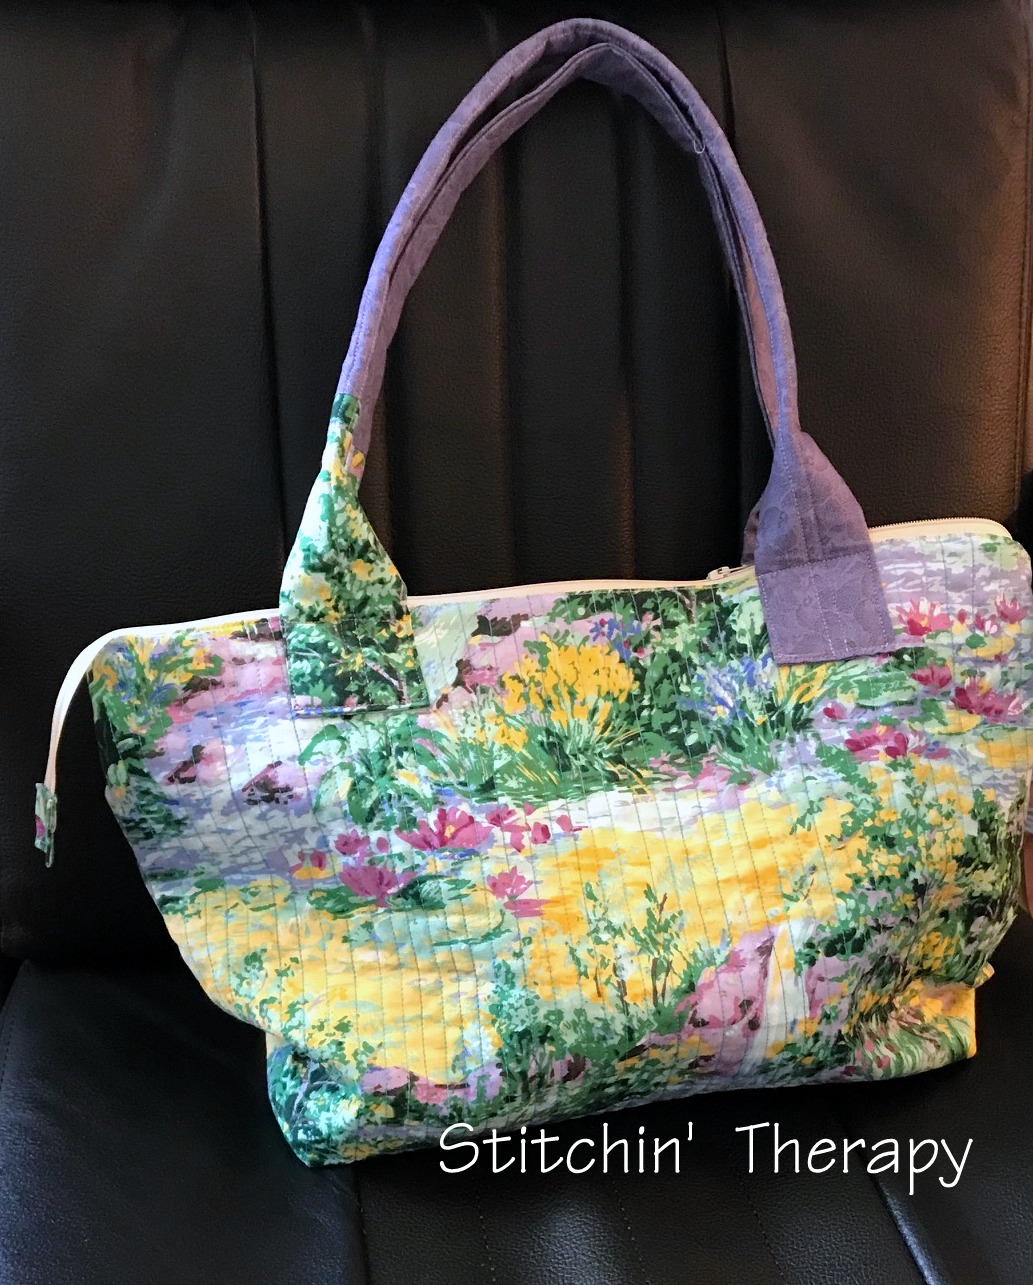 Stitchin' Therapy: Summer arrived